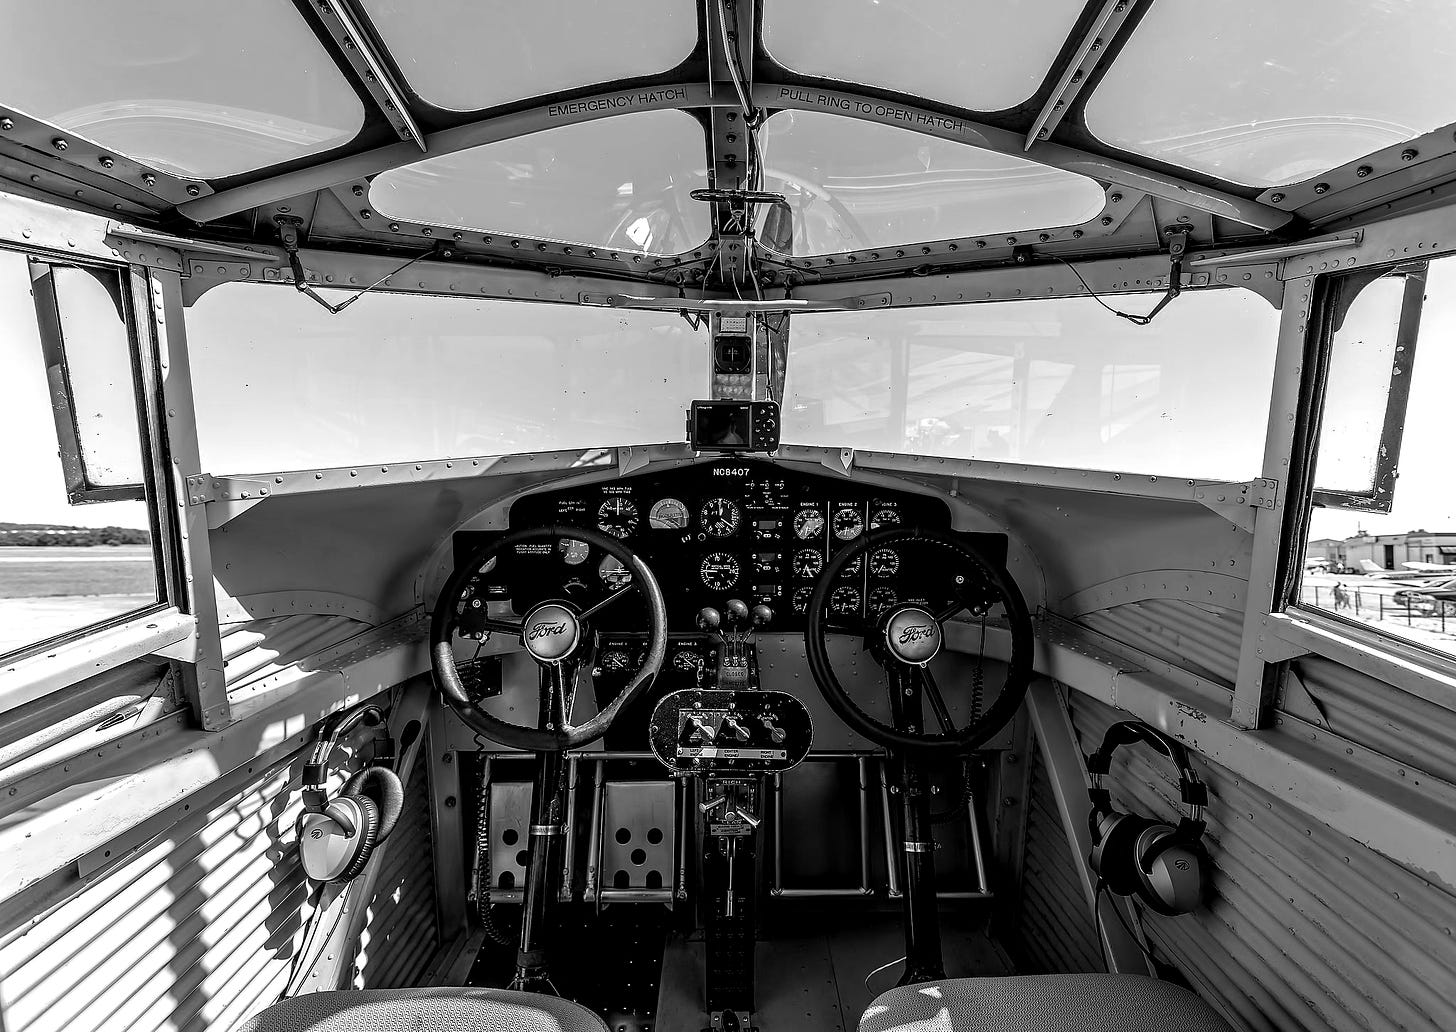 A black and white photograph of the interior of an airplane cockpit